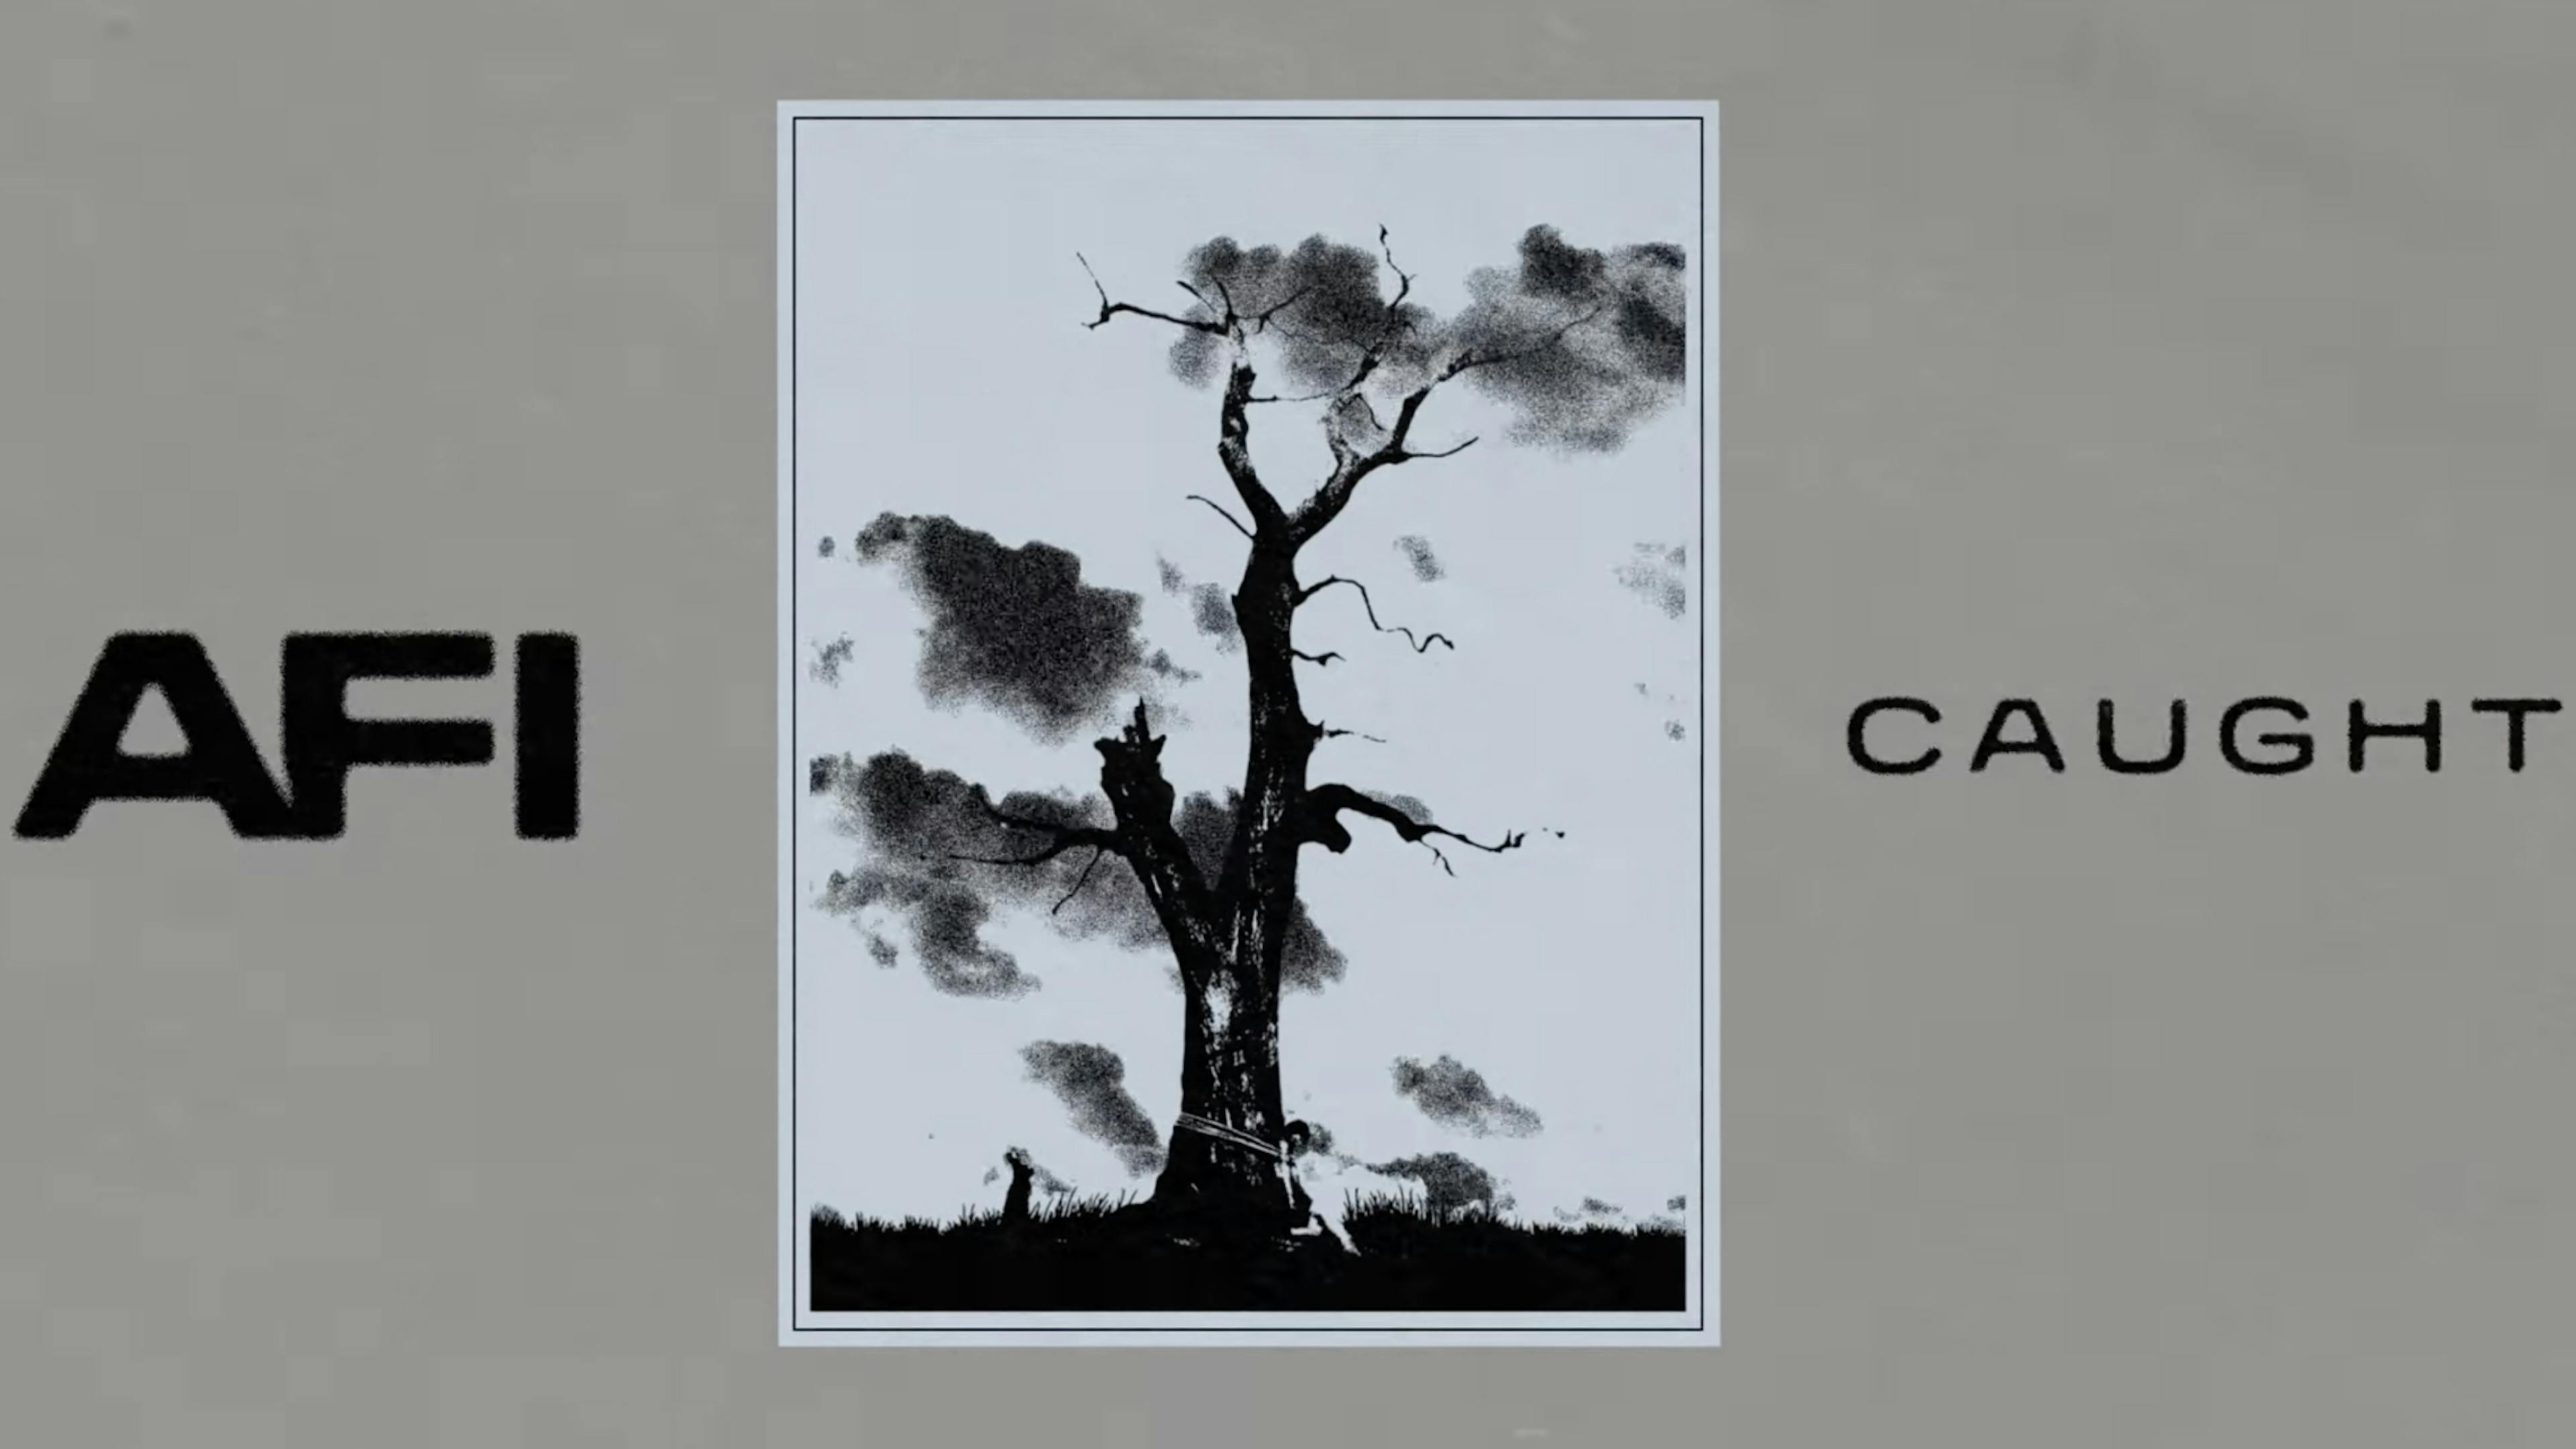 Listen to AFI's beautiful, delicate new song, Caught